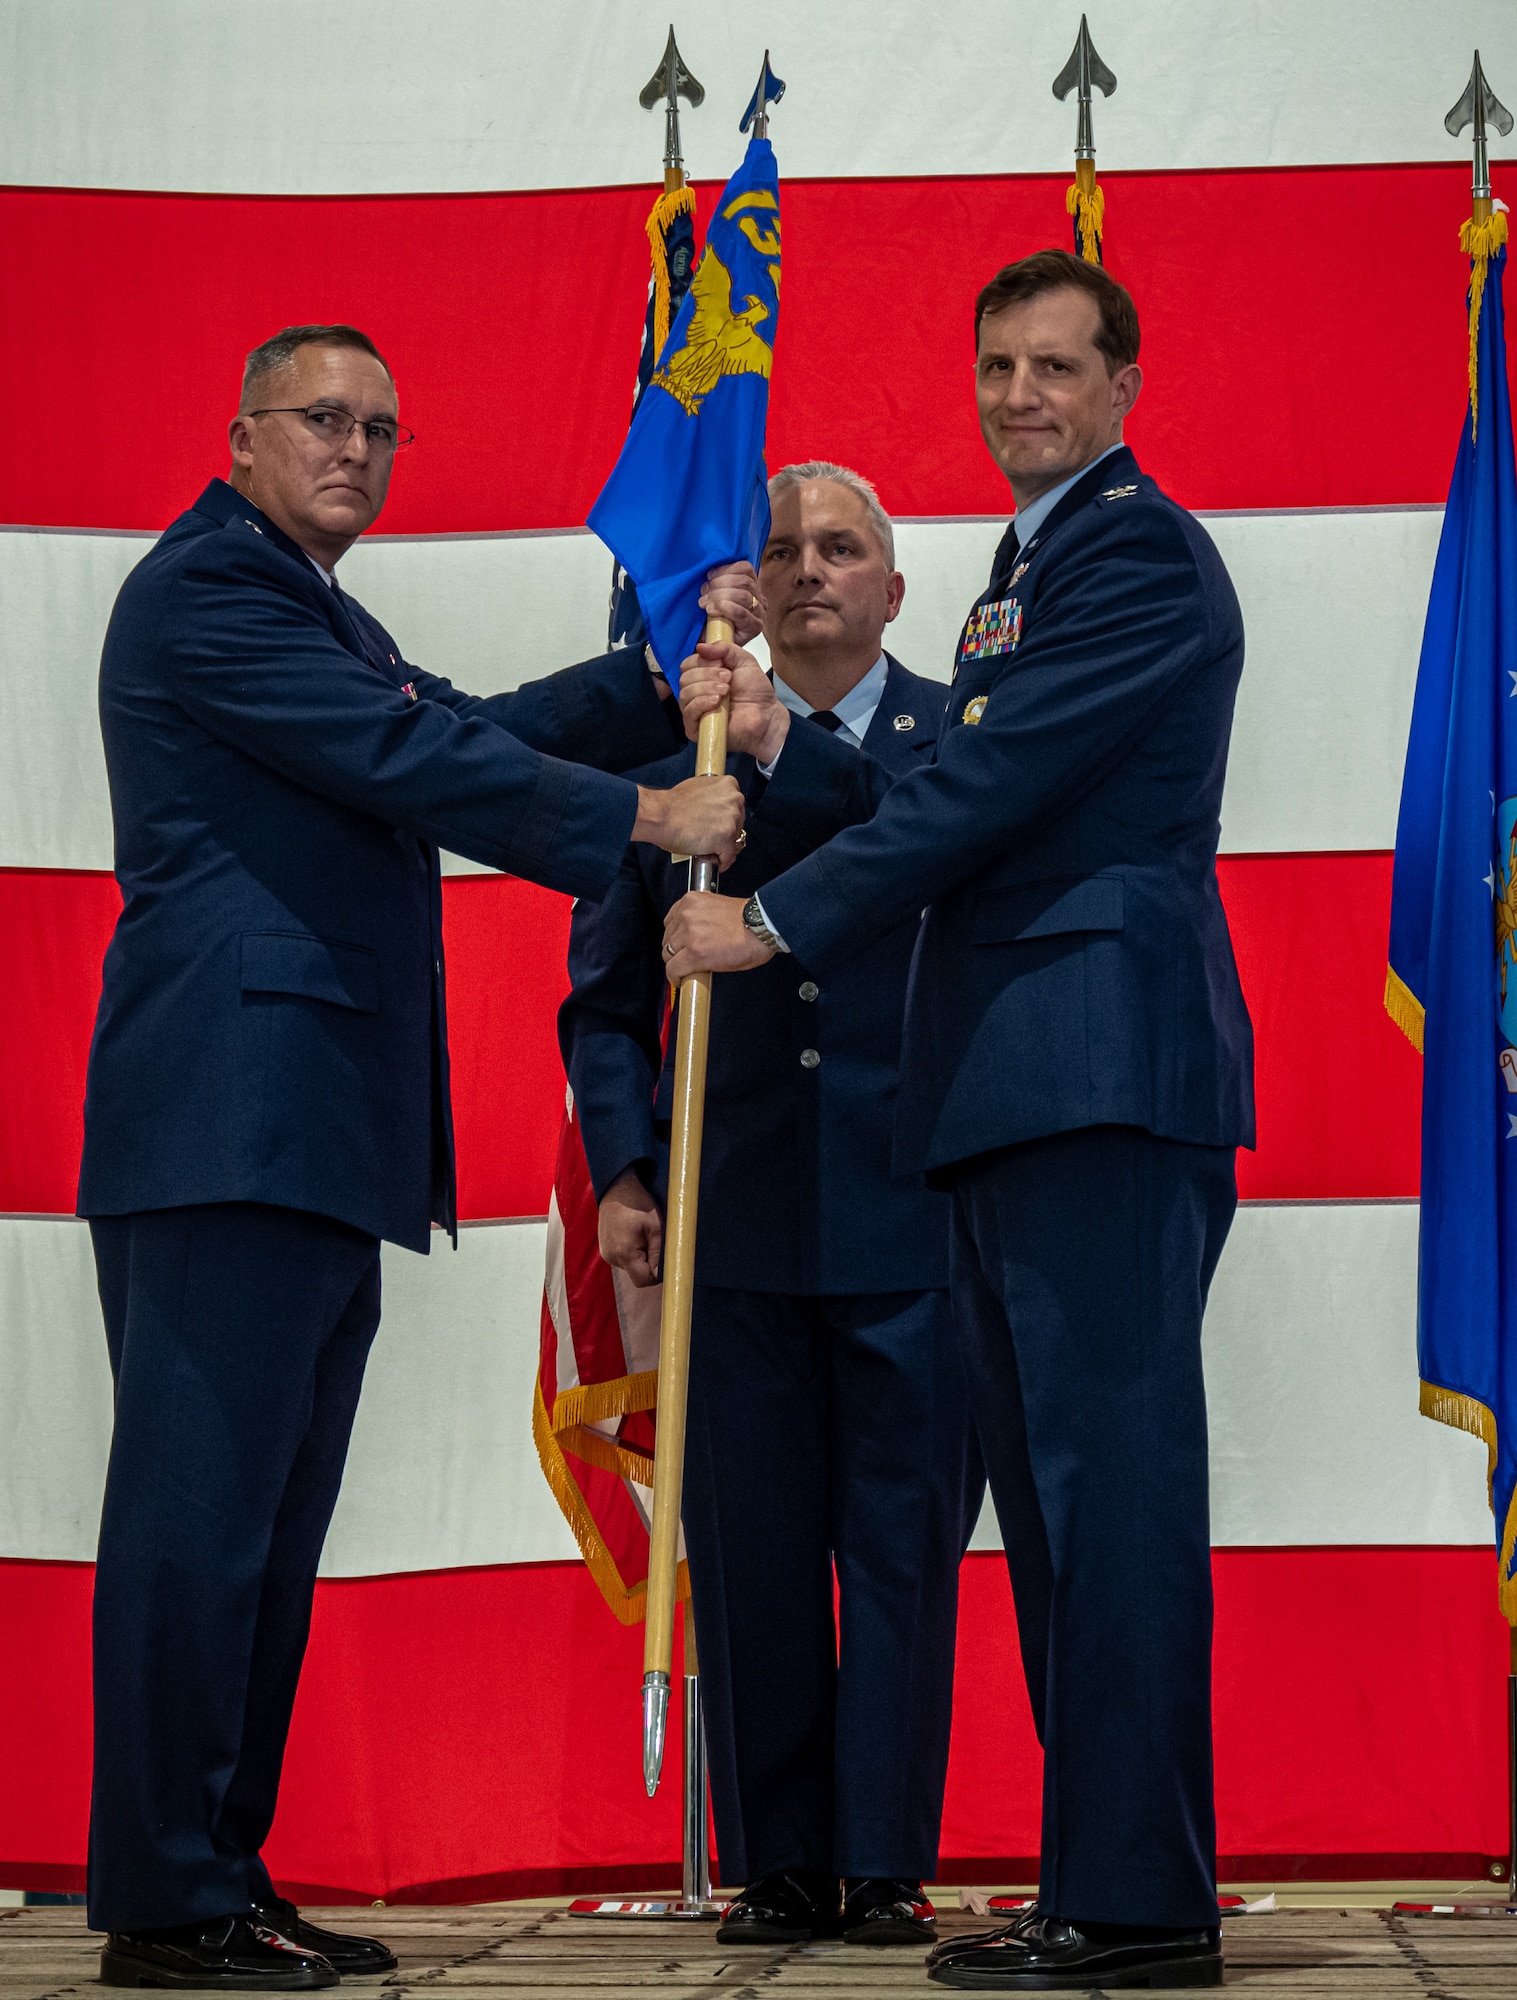 Two Air National Guard officers hold military unit guidon flag.